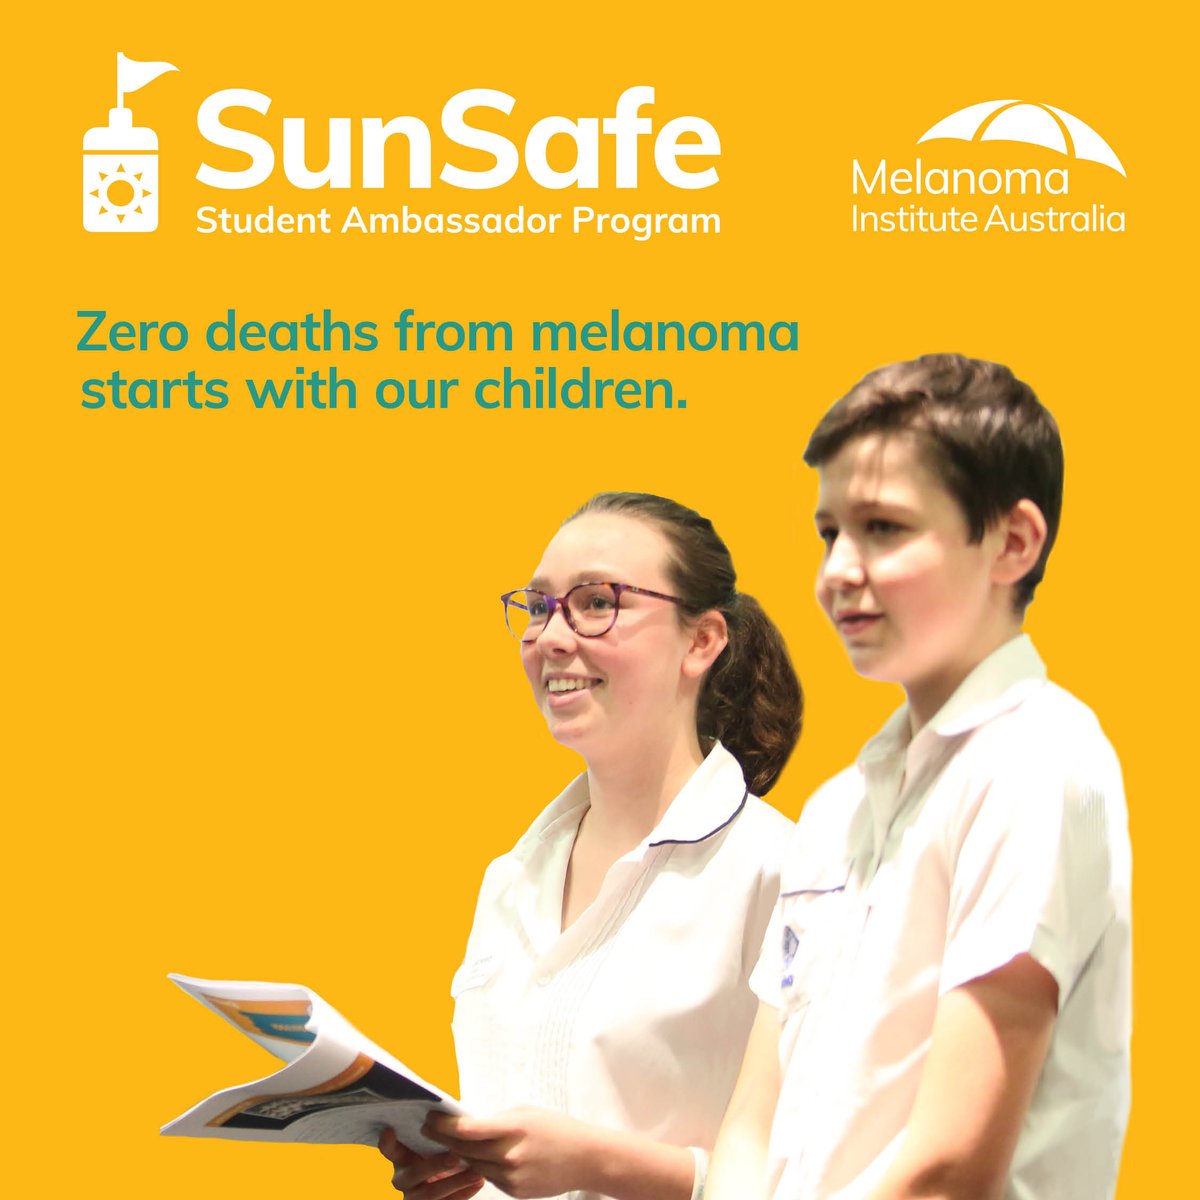 High schools are invited to register now for MIA's free #SunSafe #StudentAmbassadorProgram which trains students on sun safety & presentation skills. Students return to school to share messaging with peers. Parents, please encourage schools to join program melanoma.org.au/get-involved/s…